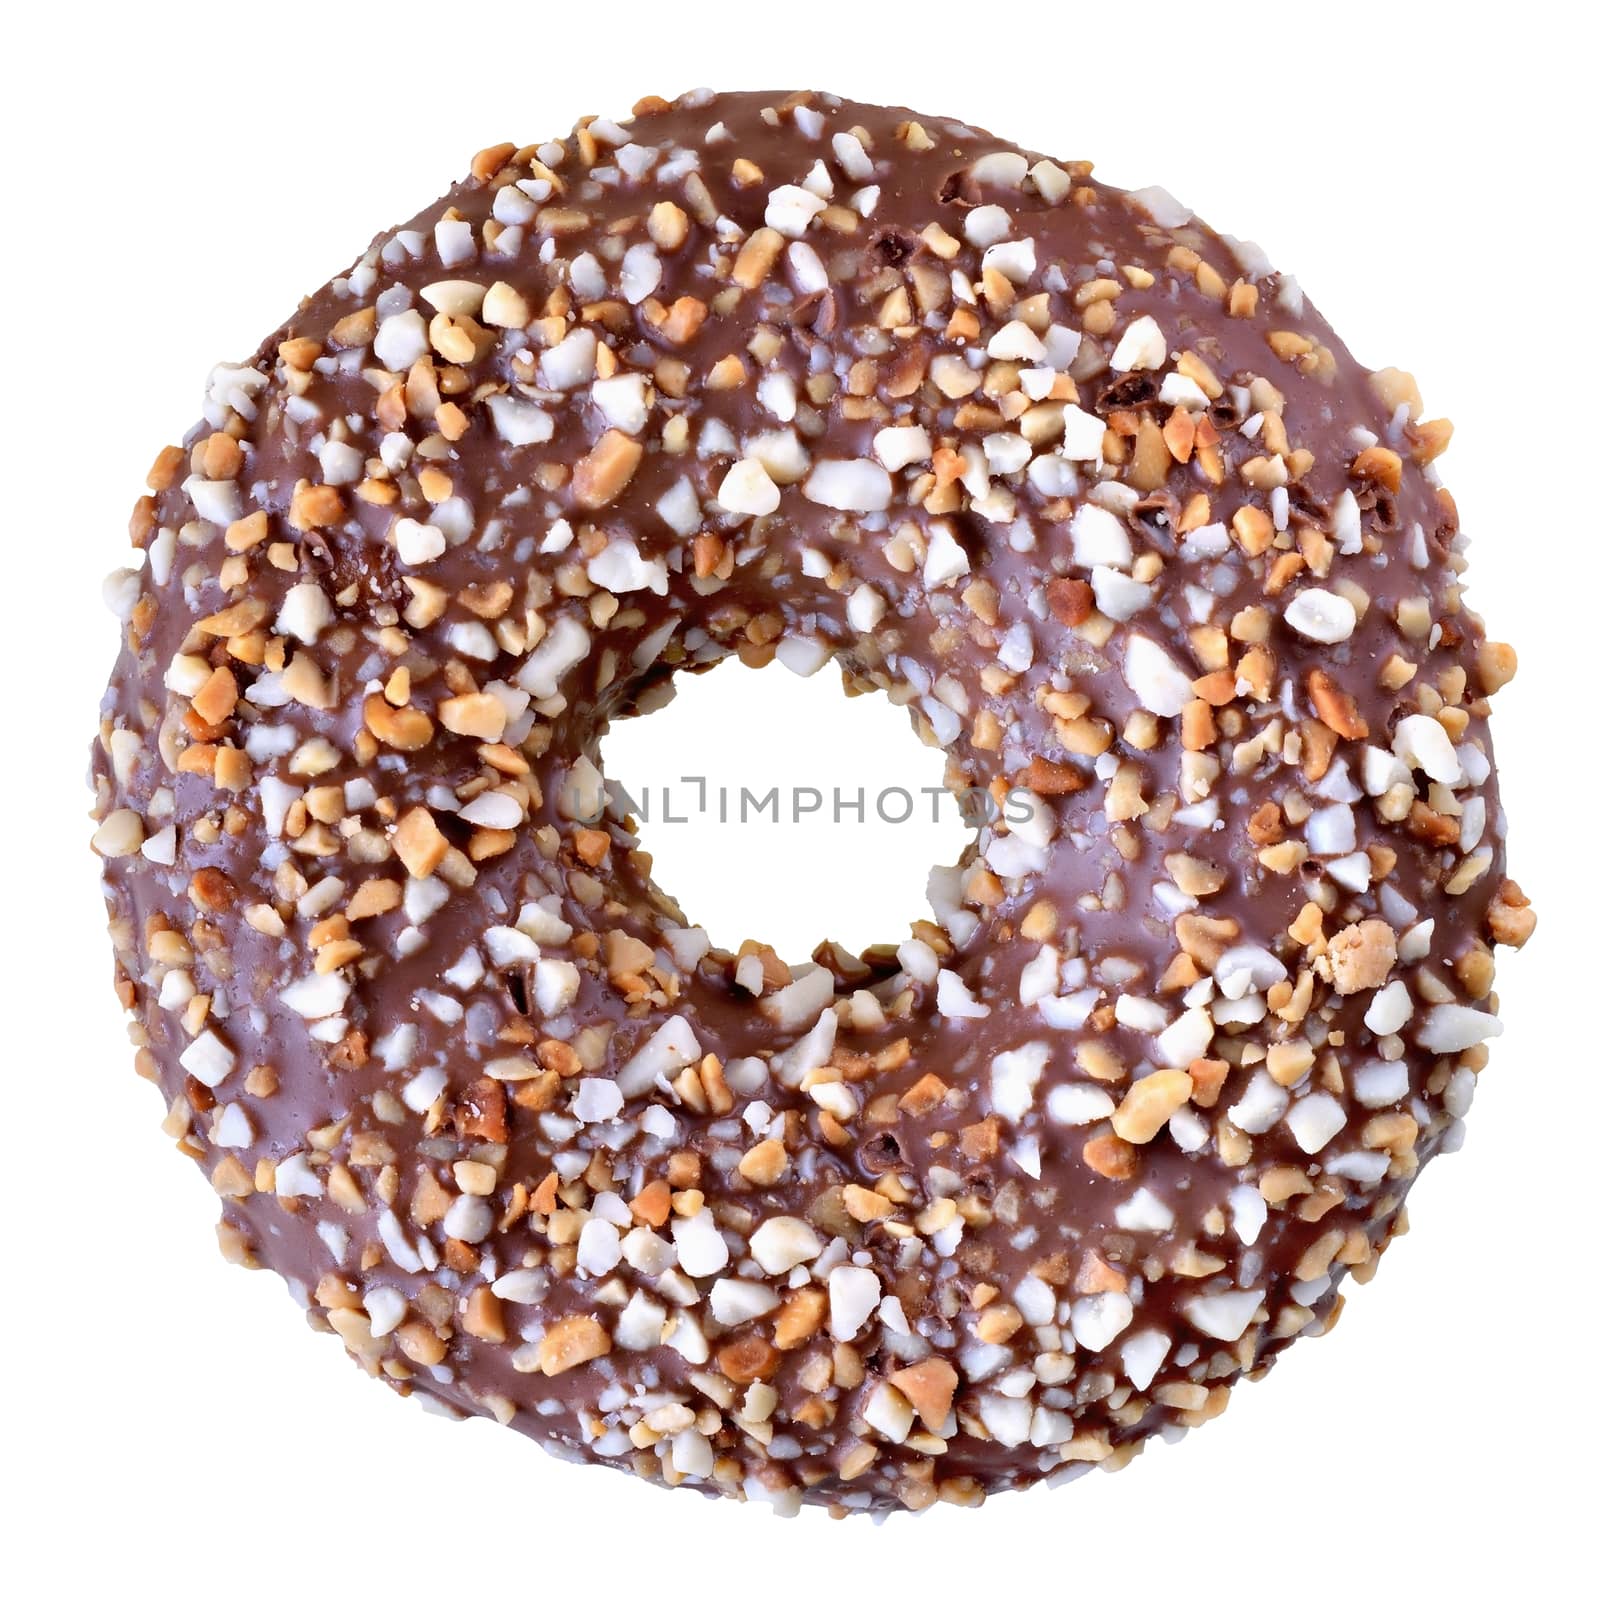 Chocolate glazed donut with nuts flakes isolated on white background top view